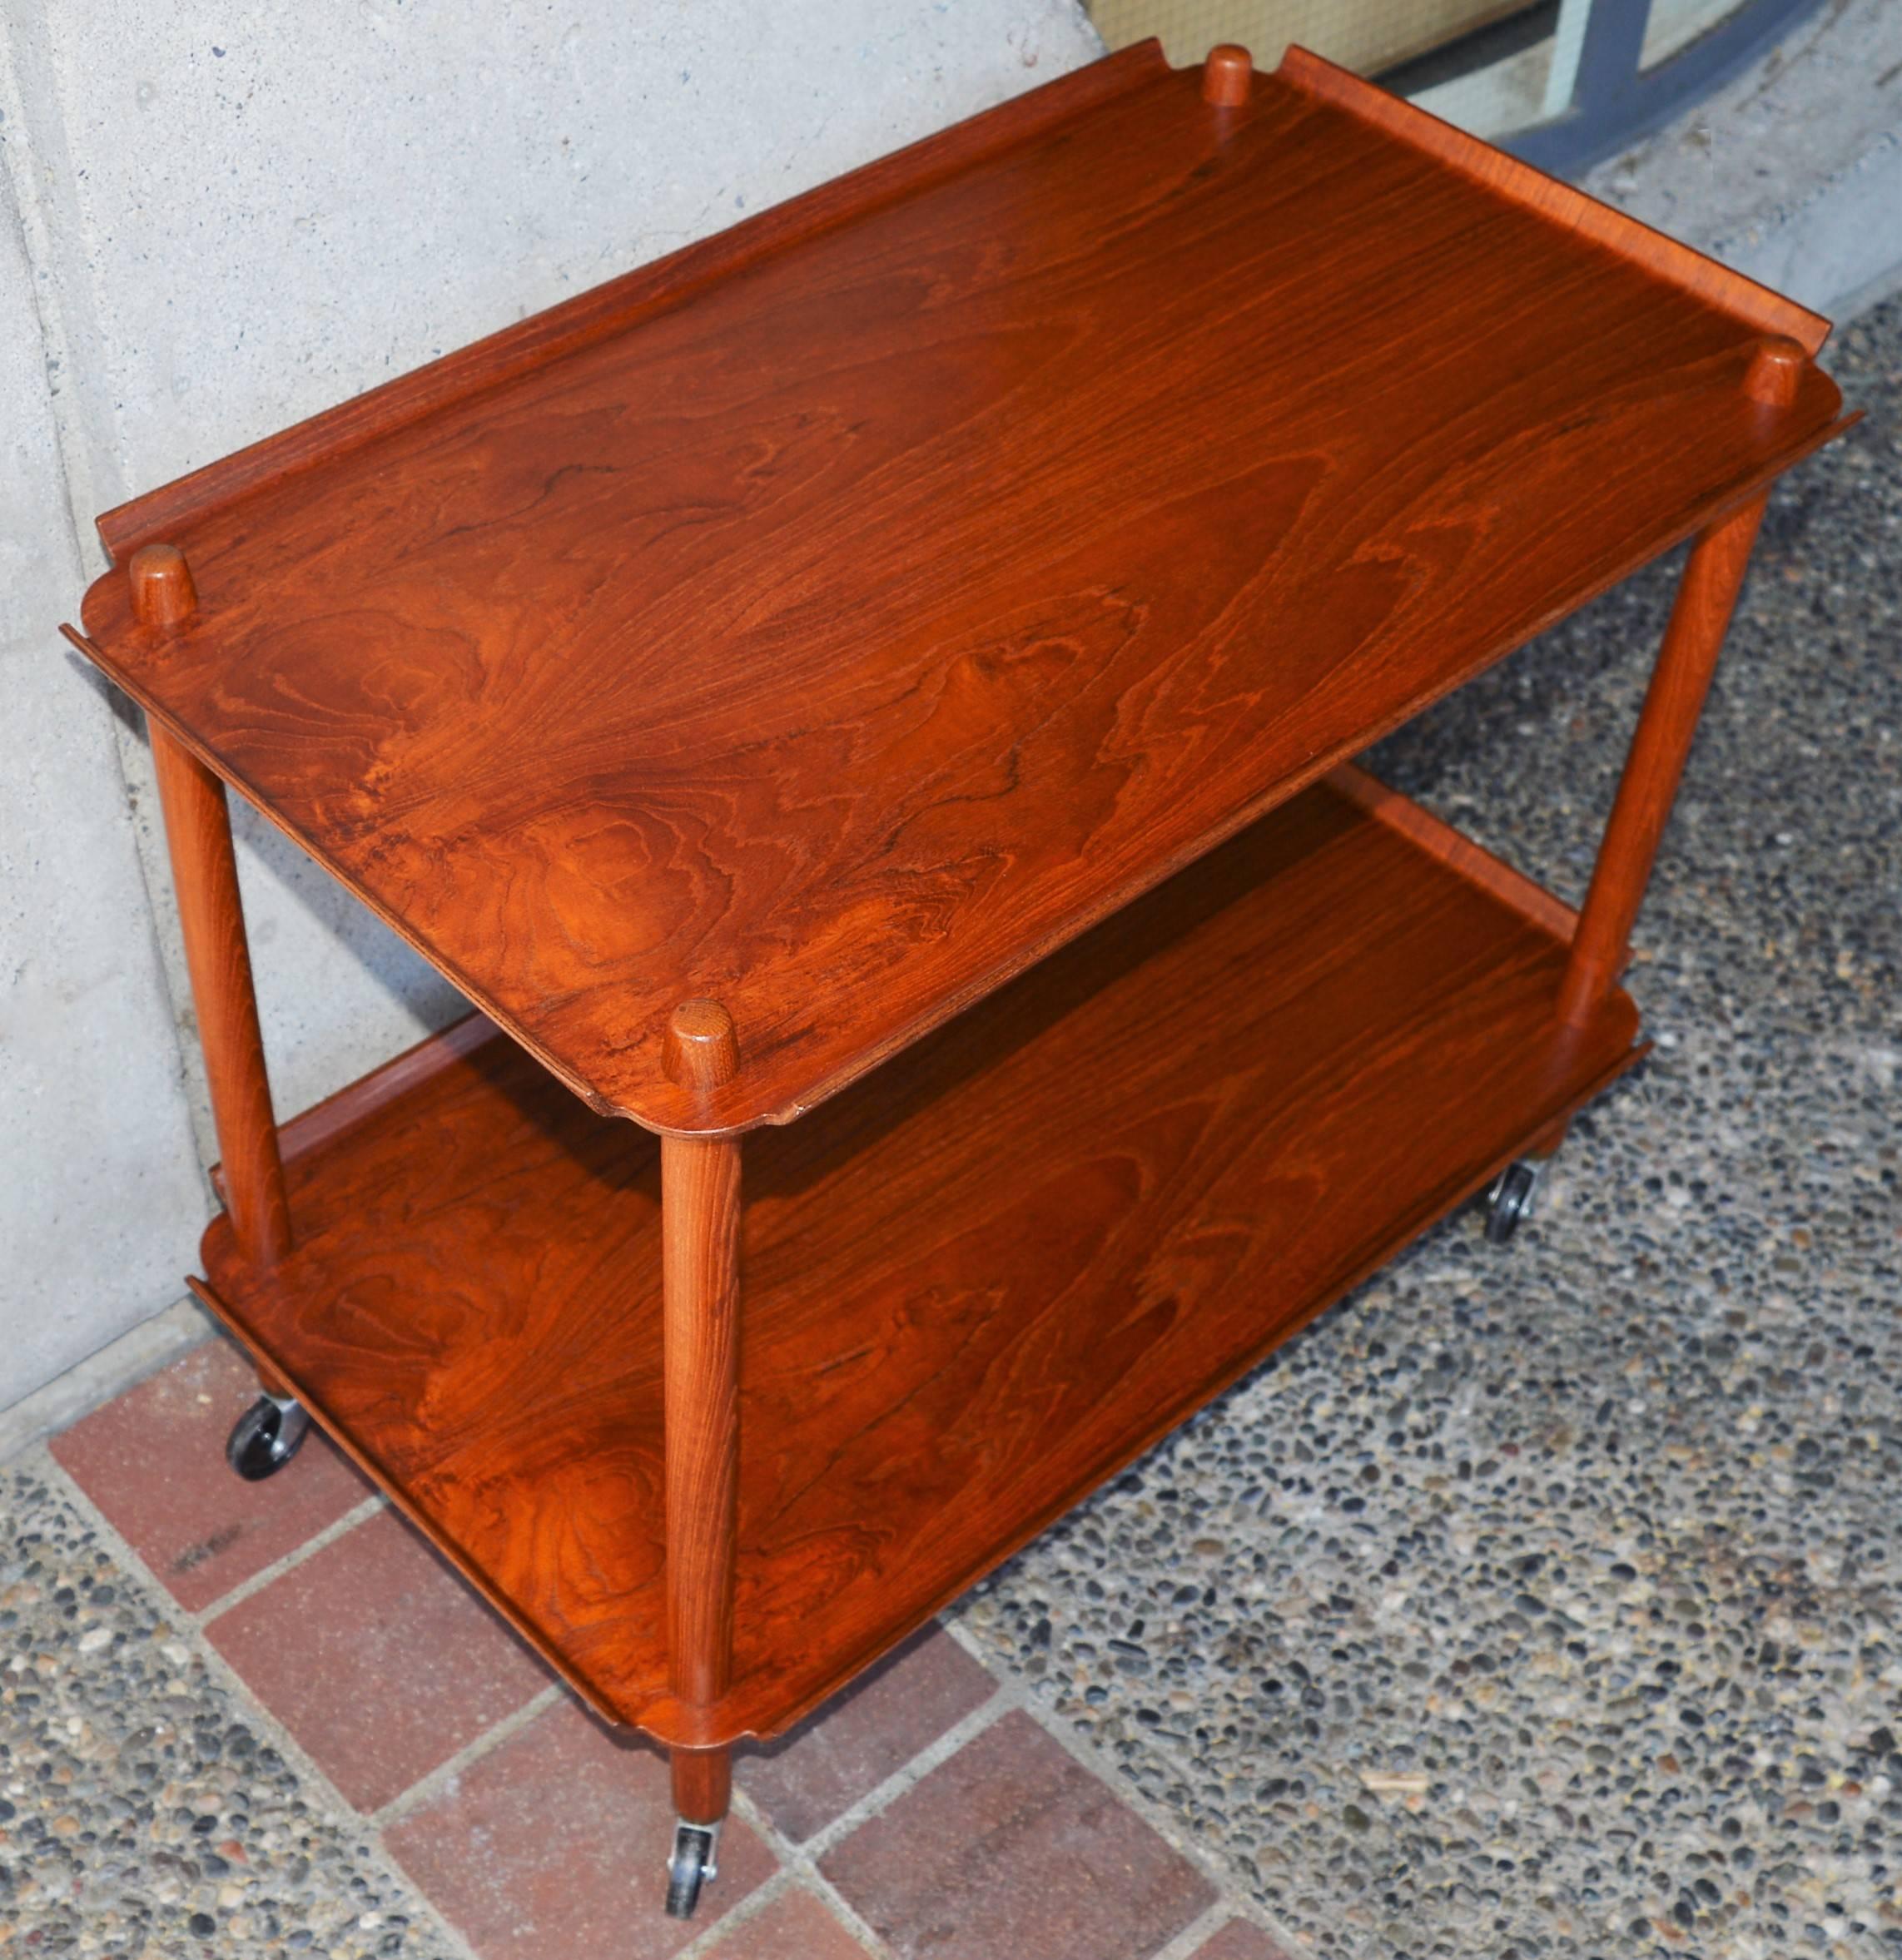 This lovely Danish modern teak two-tier bar cart is a rare version made by Poul Hundevad. Cleverly designed, it can be completely disassembled where it looks like the legs pierce the tiers. Each bentply tier has gorgeous flared edges and the top of